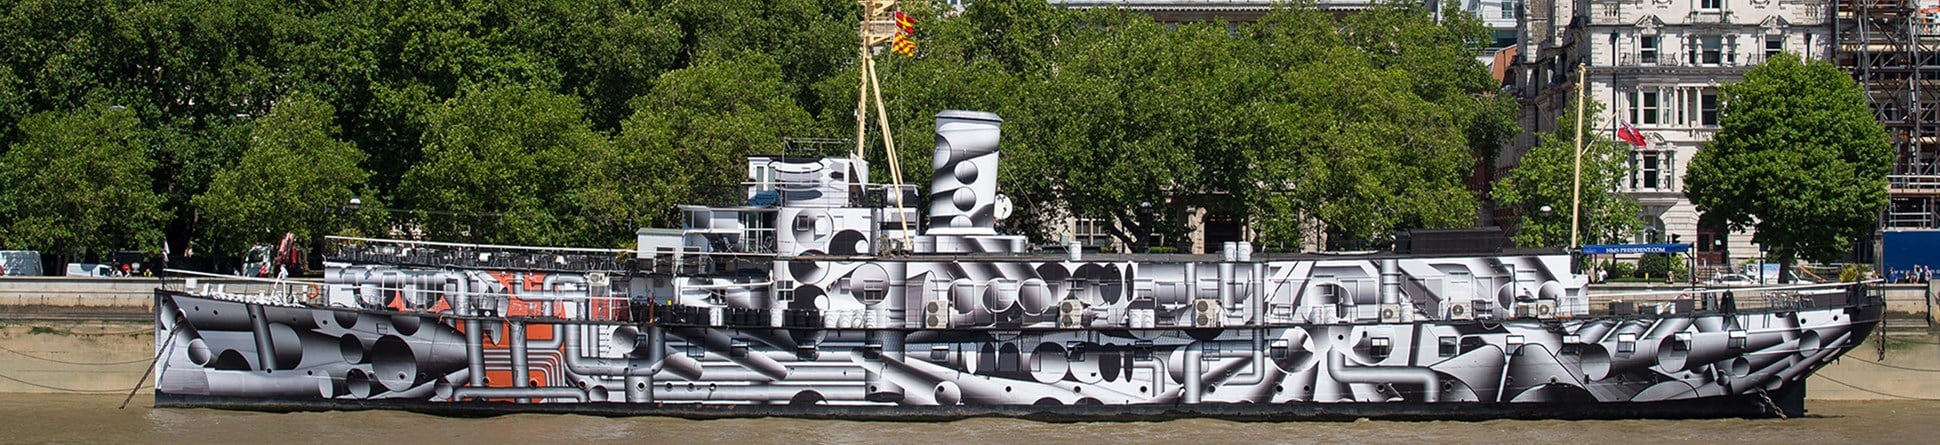 HMS President, London, originally built in 1918 as HMS Saxifrage, as part of the centennial commemorations the ship has been painted in a scheme inspired by wartime dazzle camouflage